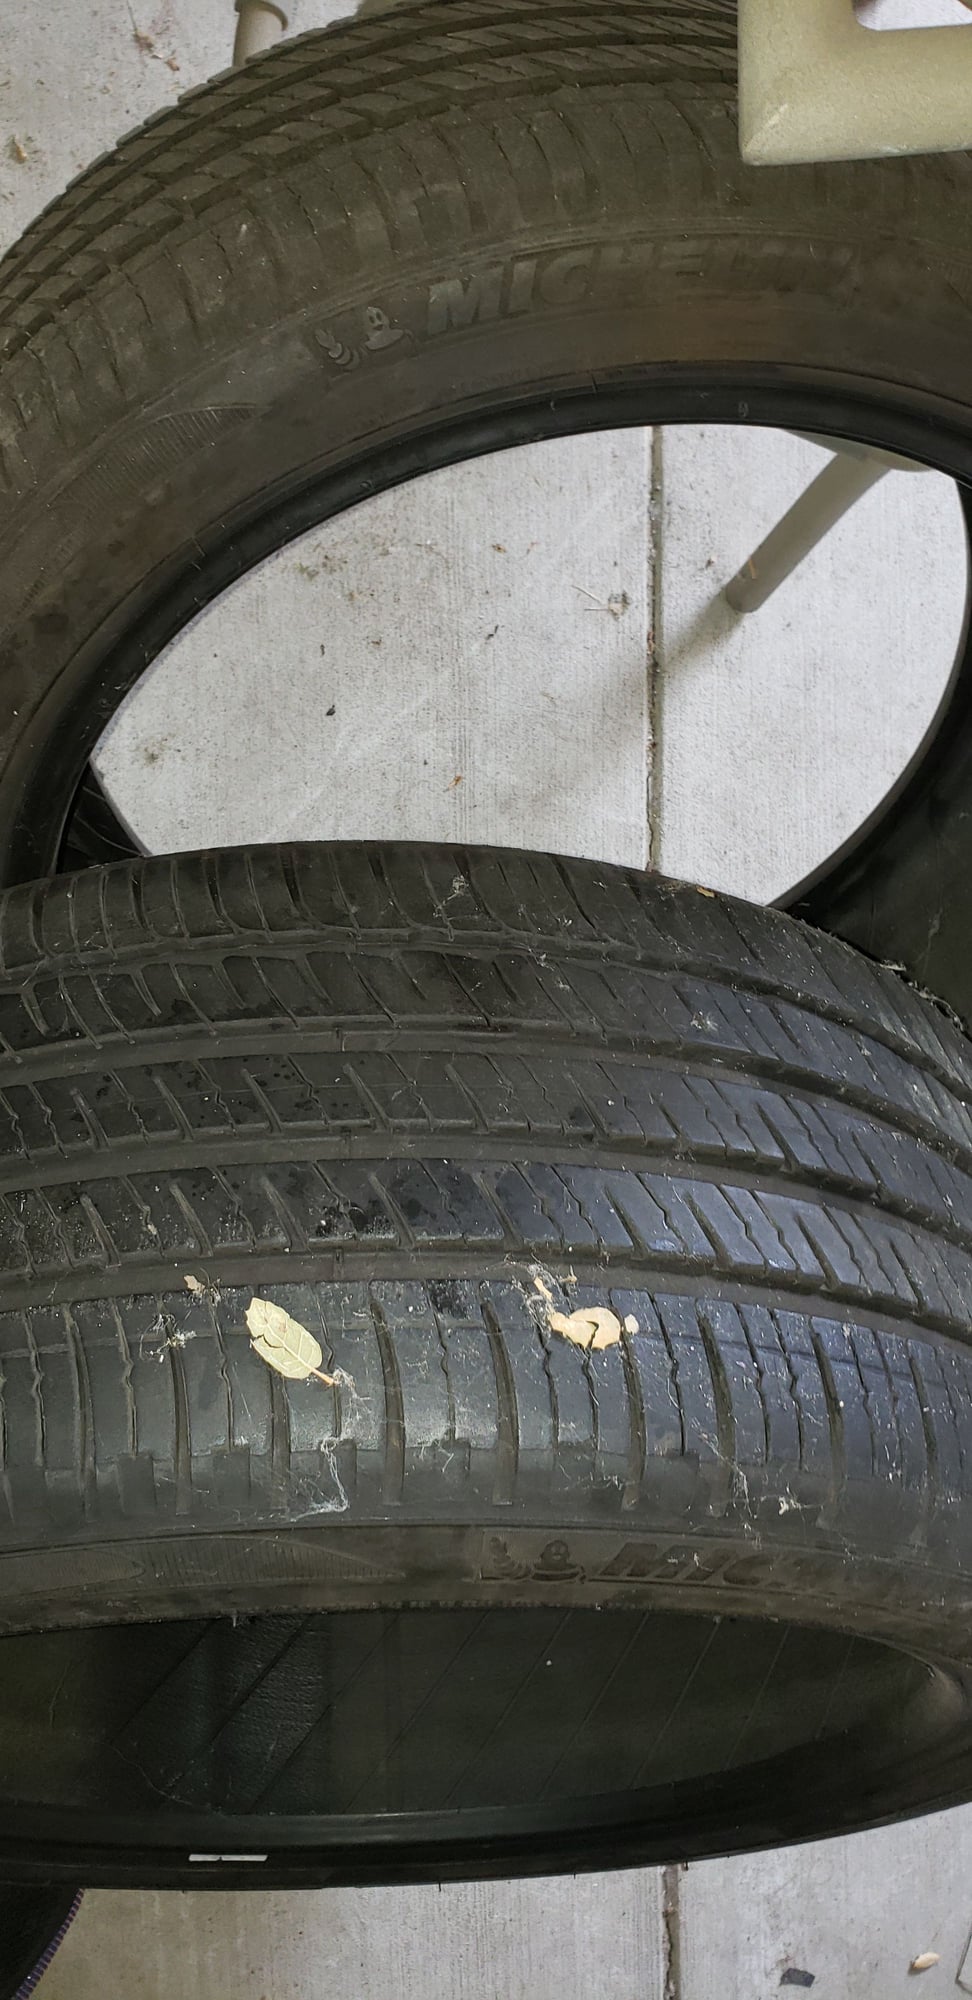 Wheels and Tires/Axles - Selling 2 Michelin Primacy MXV4 and one Pilot Sport AS3 - New - Los Angeles, CA 90606, United States